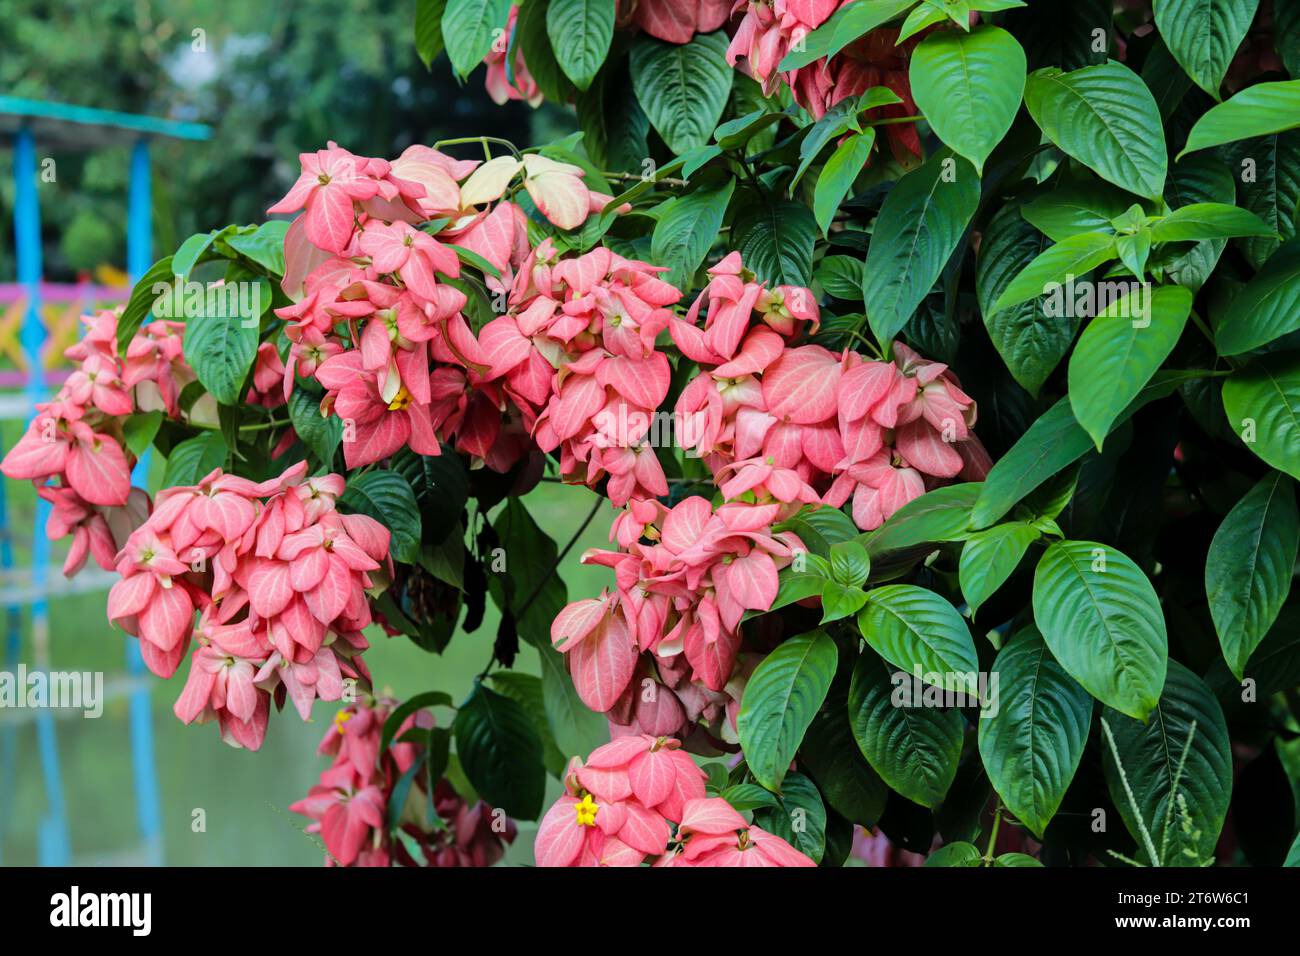 The Buddha's Lamp or Mussaenda philippica or Queen Sirikit has small orange, yellow, and pink, star-shaped flowers arranged in small clusters. It's cu Stock Photo